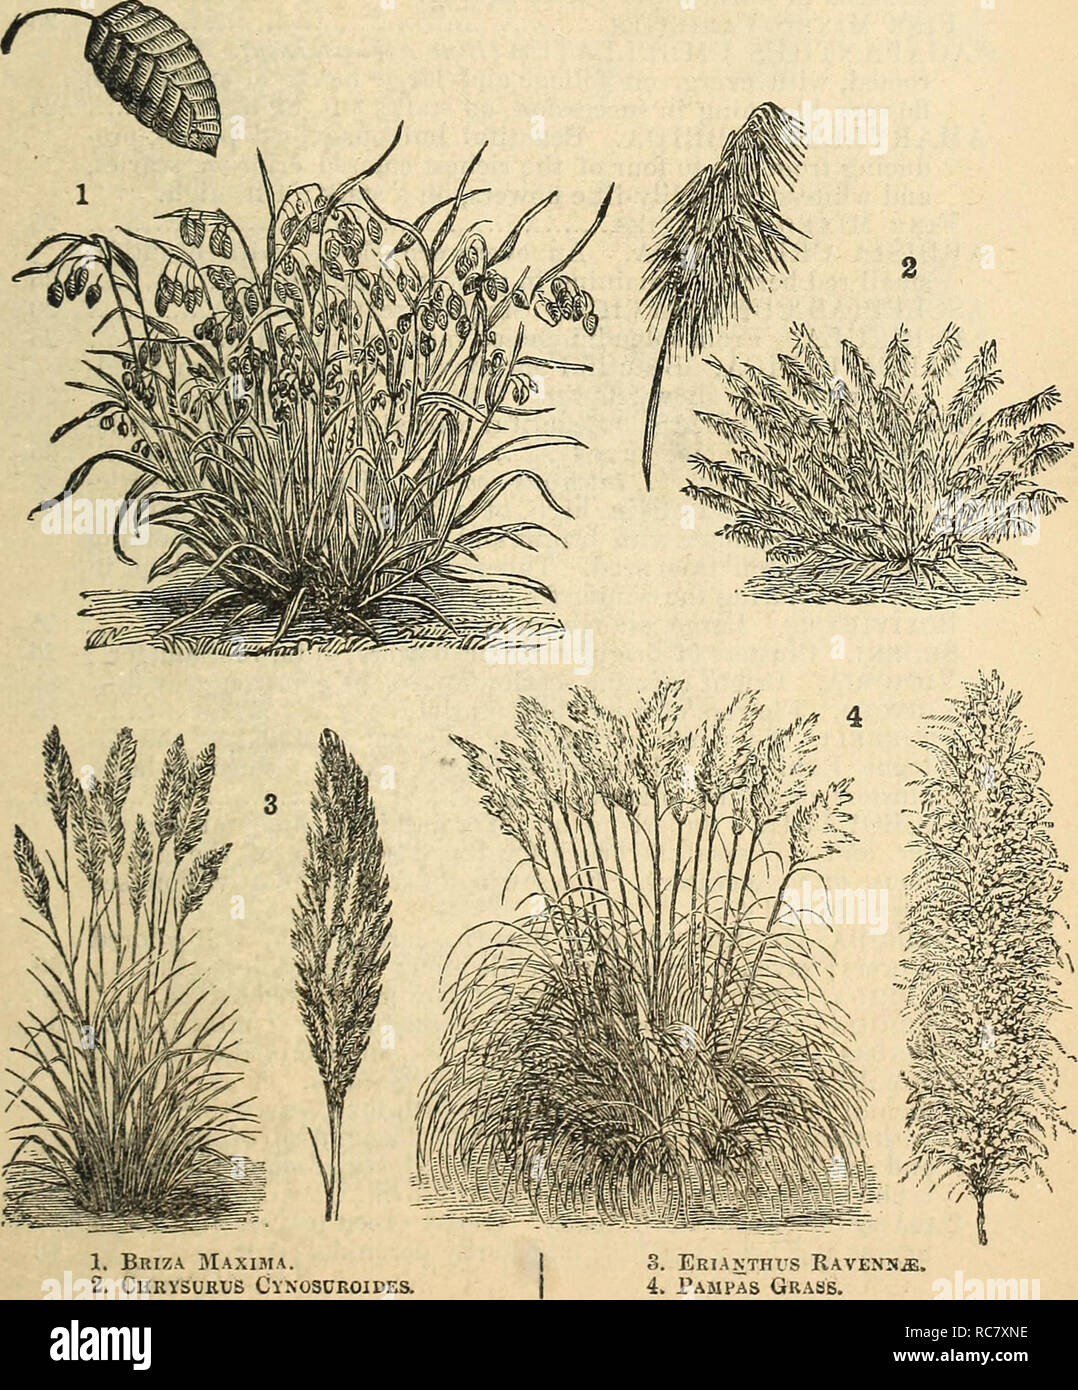 . Dreer's garden calendar : 1878. Seeds Catalogs; Nursery stock Catalogs; Gardening Catalogs; Flowers Seeds Catalogs. Dreer^s Garden Calendar. 81 LASIAGROSTIS ARGENTEA. A beautiful silver-white grass, fine for bouquets; hurdy perennial 5 MILIUM MULTIFLOllUM {Pearl Grass). A very graceful va- riety 5 PENNISETUM LONGISTILUM. A very graceful plant; li ft... 5 PHALAKIS AKU^'DINACEA. A variety of Ribbon Grass; hardy perennial; 3 ft 5 STIPA RENNATA (Feather Grass). Hardy perennial plant with beautiful delicate white feathery grass; flowering the second season from seed. The seed being slow to vegeta Stock Photo